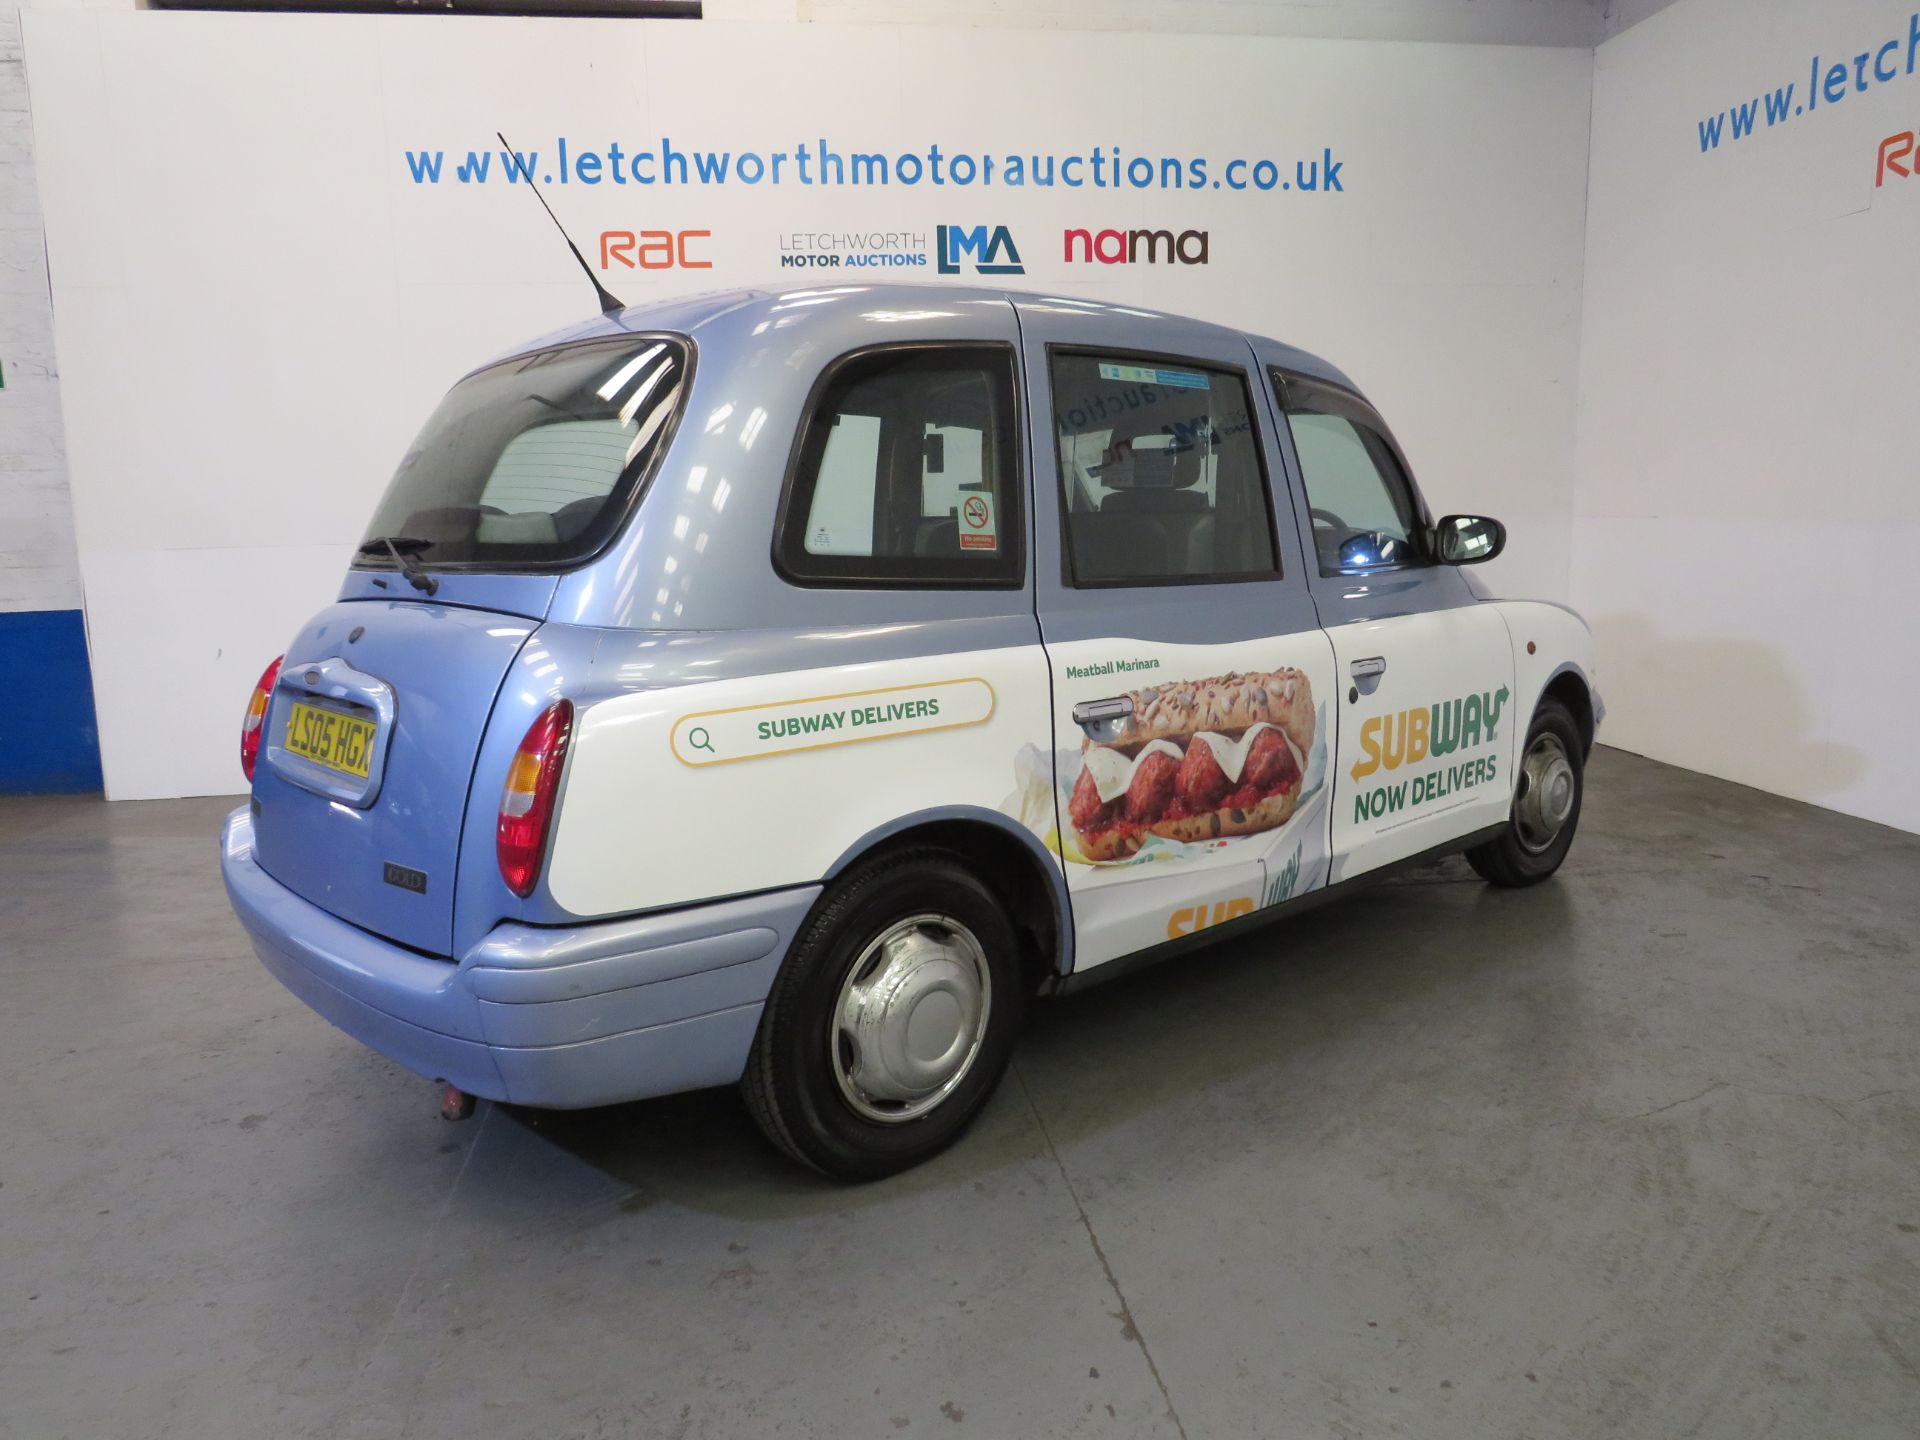 2005 London Taxis Int TXII Gold Auto - 2402cc - Image 6 of 10